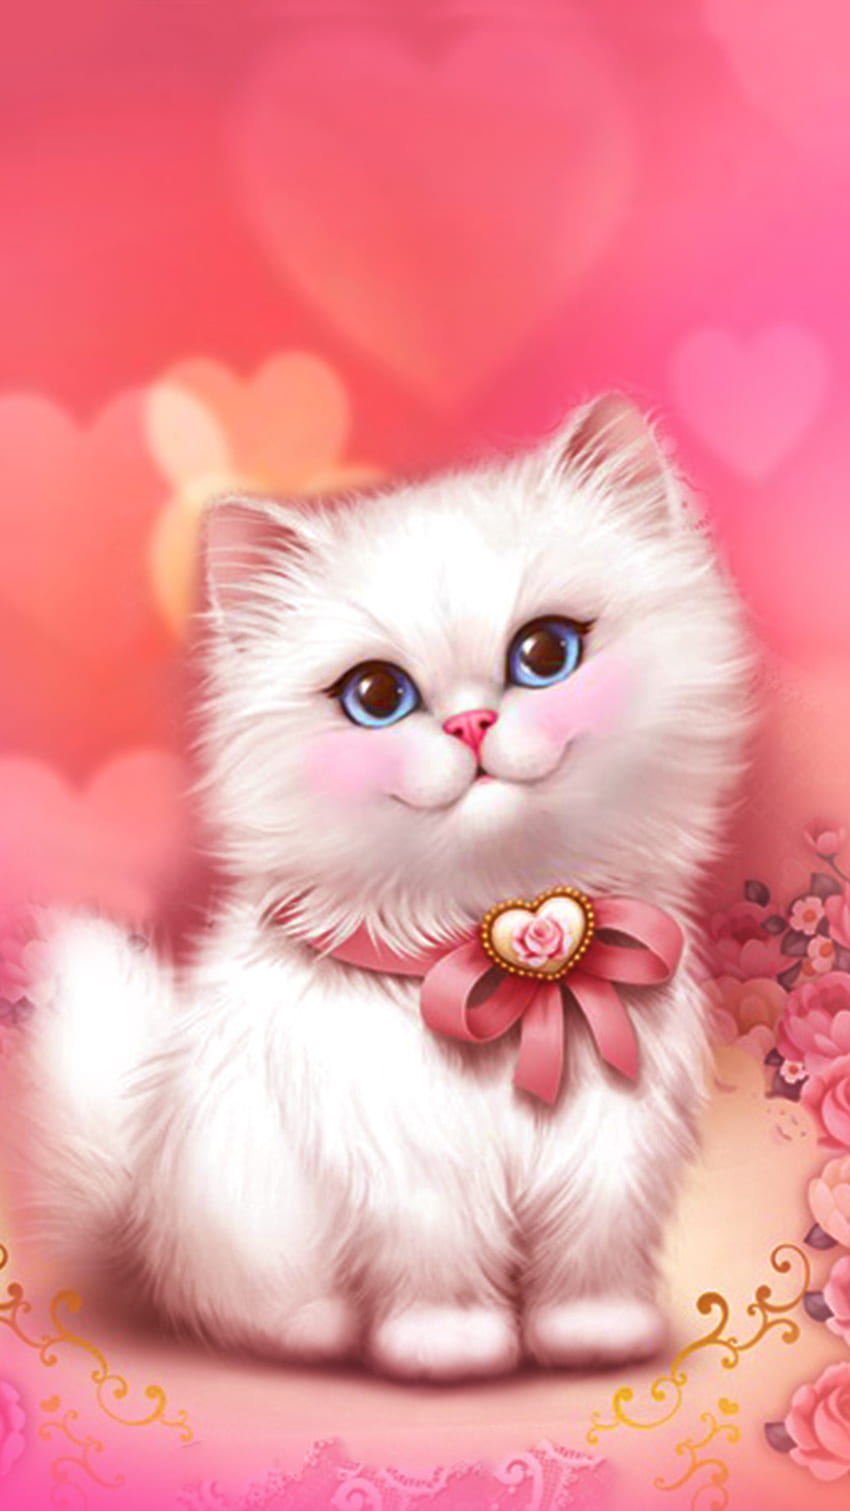 Top 999+ pink cute cat images – Amazing Collection pink cute cat images Full 4K